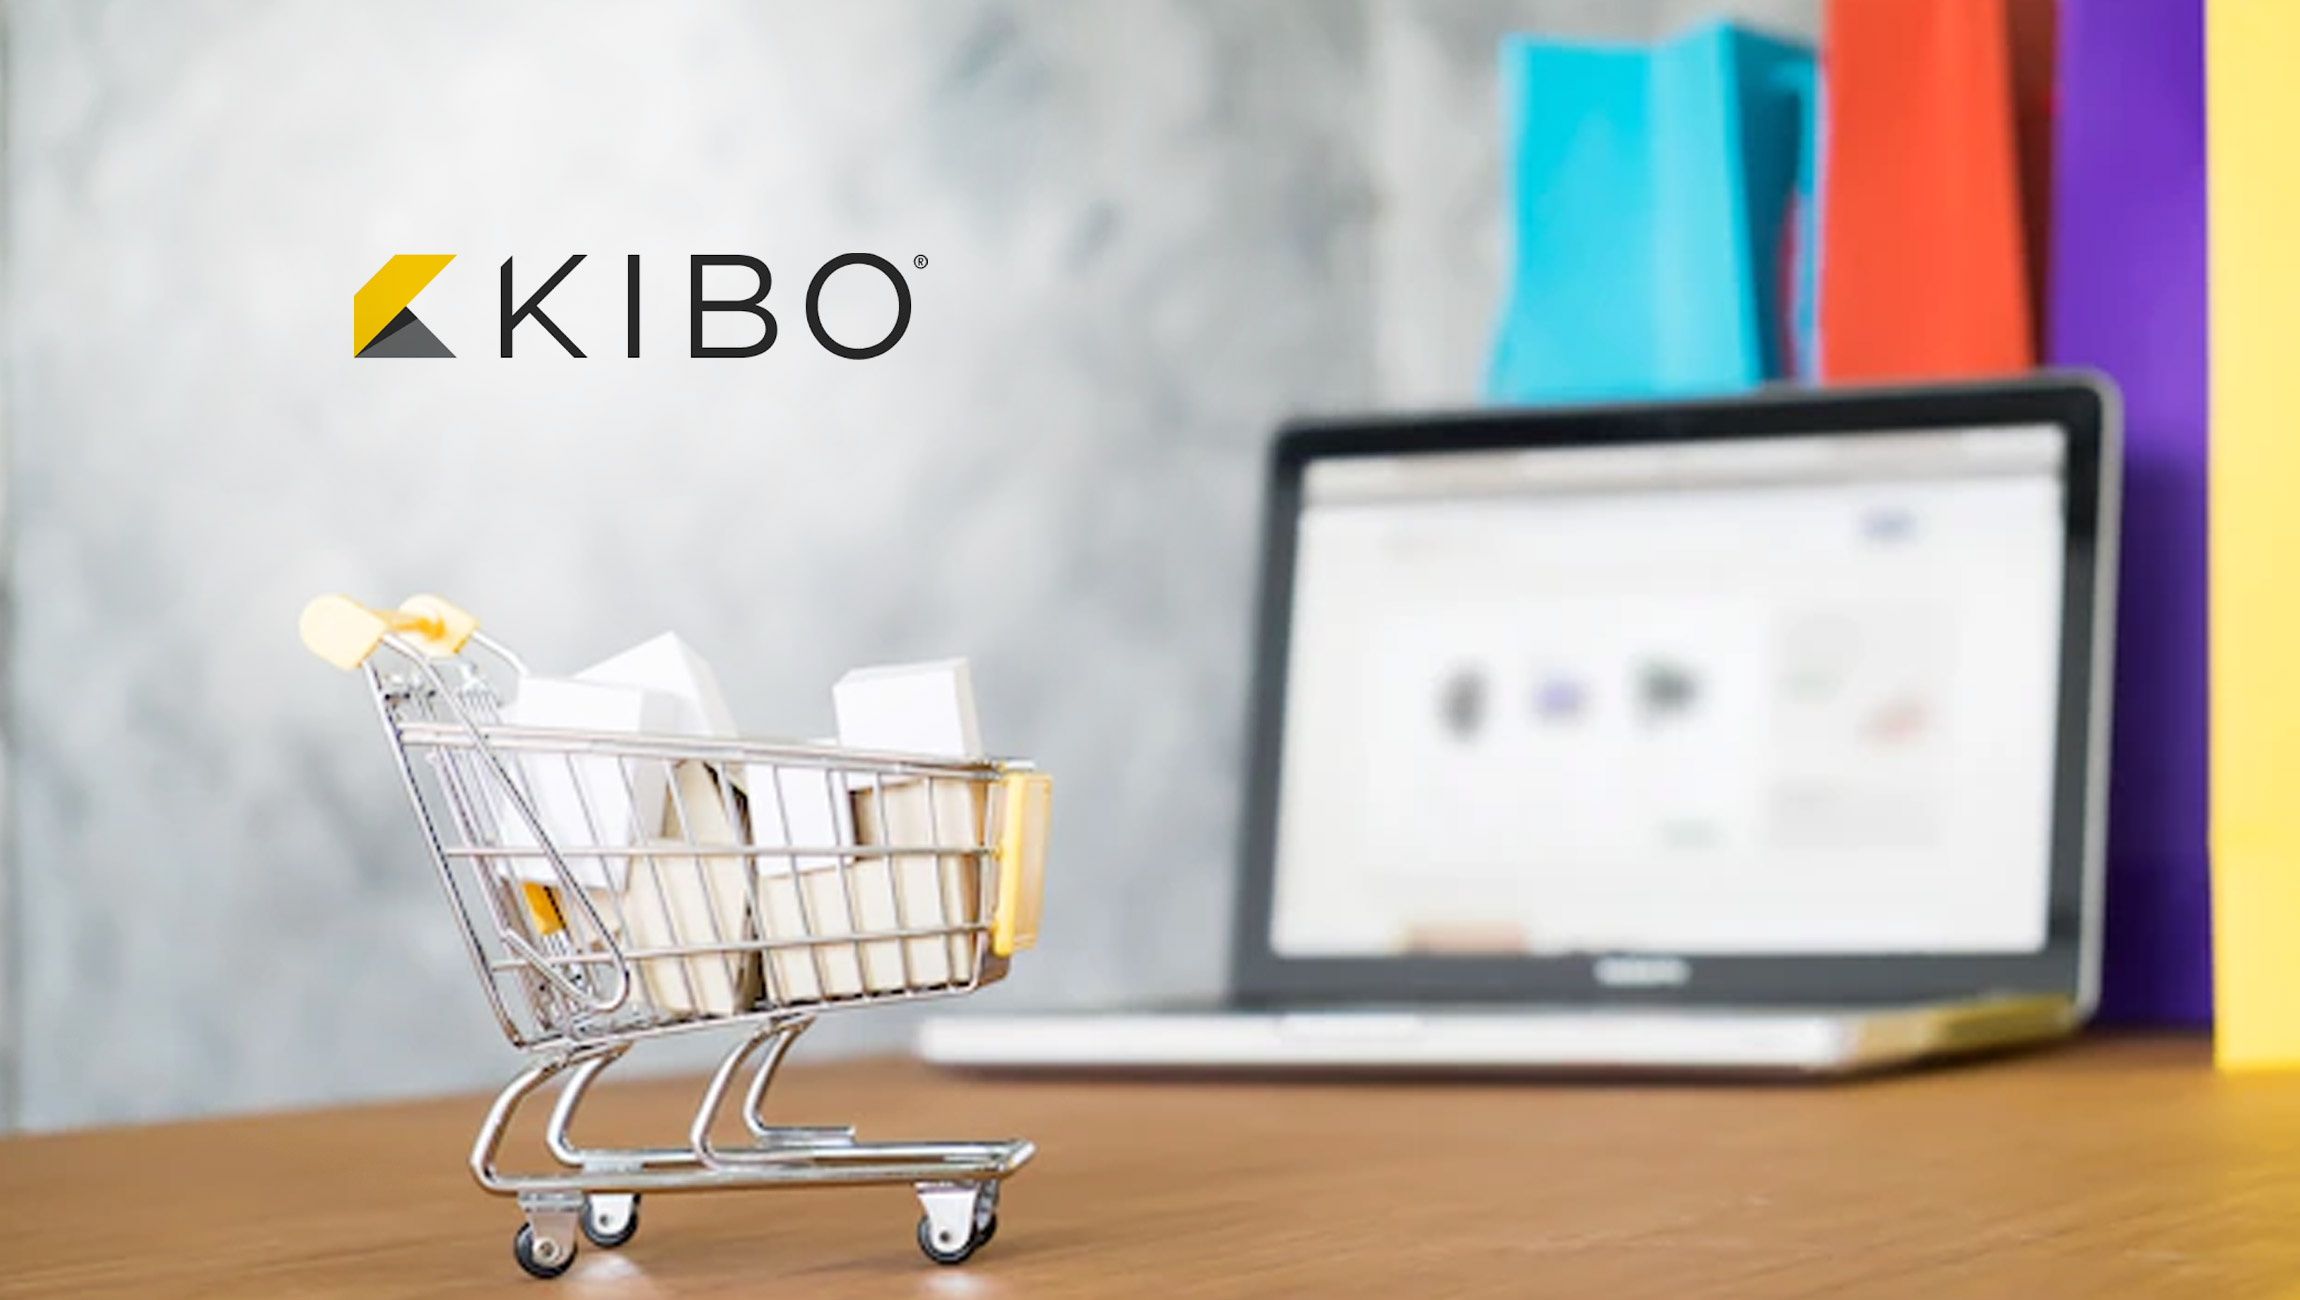 Kibo Releases Subscriptions Management To Help Retailers Boost Revenue and Customer Loyalty